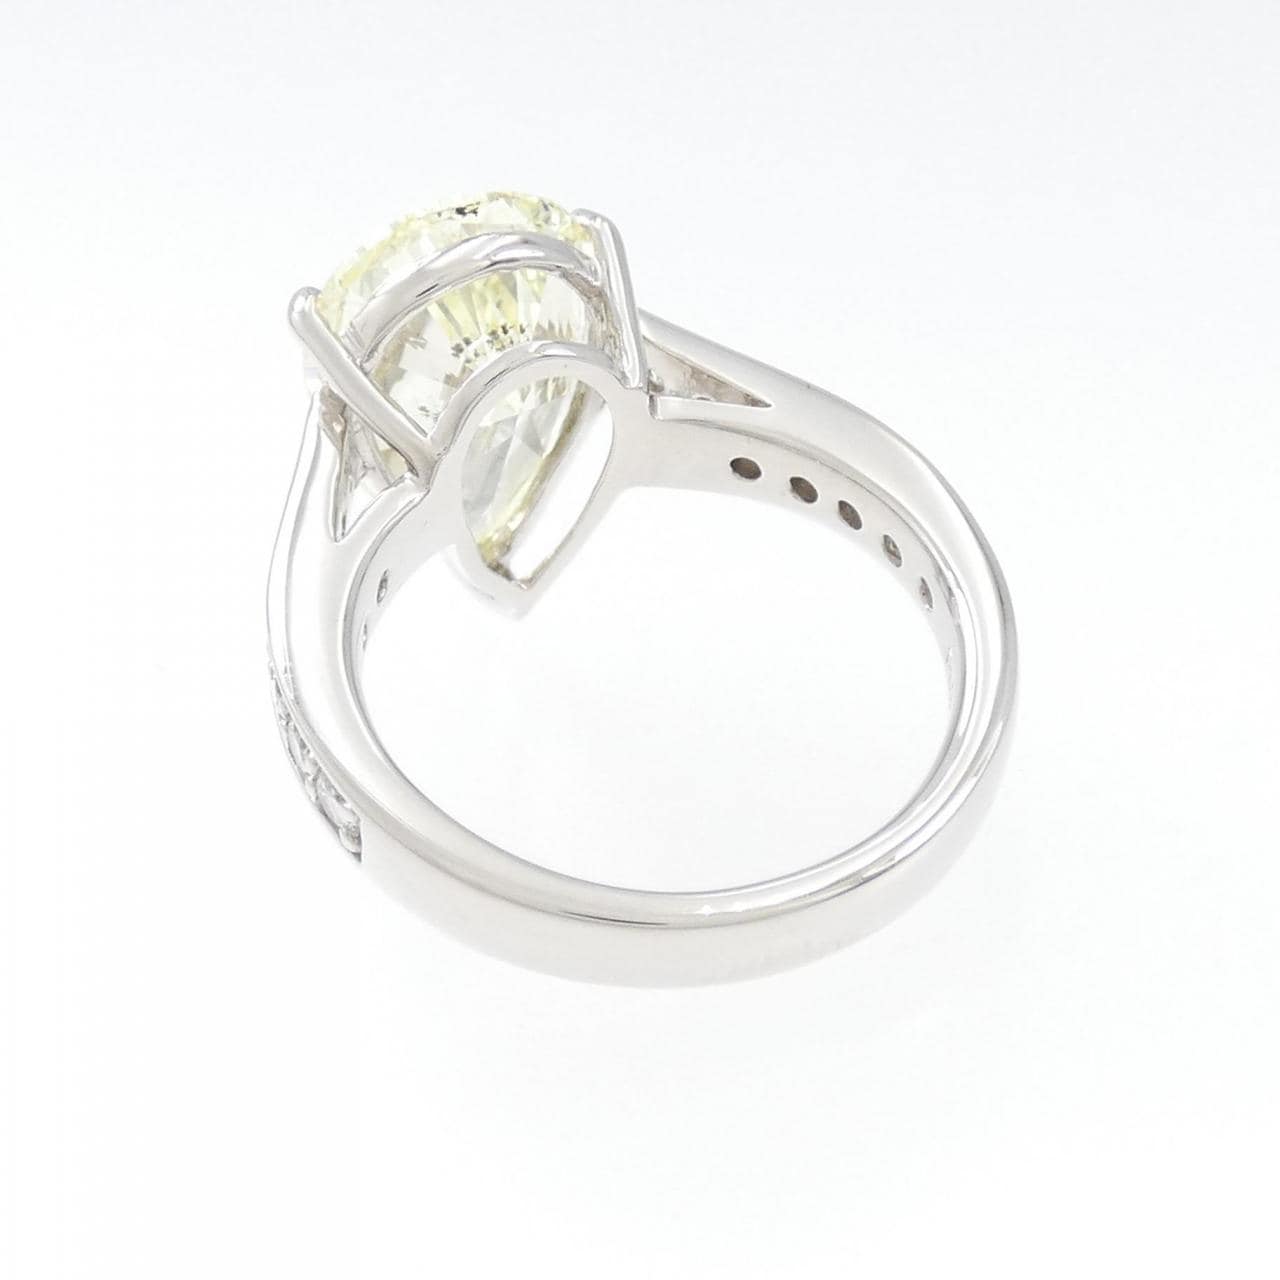 [Remake] PT Diamond Ring 5.015CT LY SI2 Pear Shape